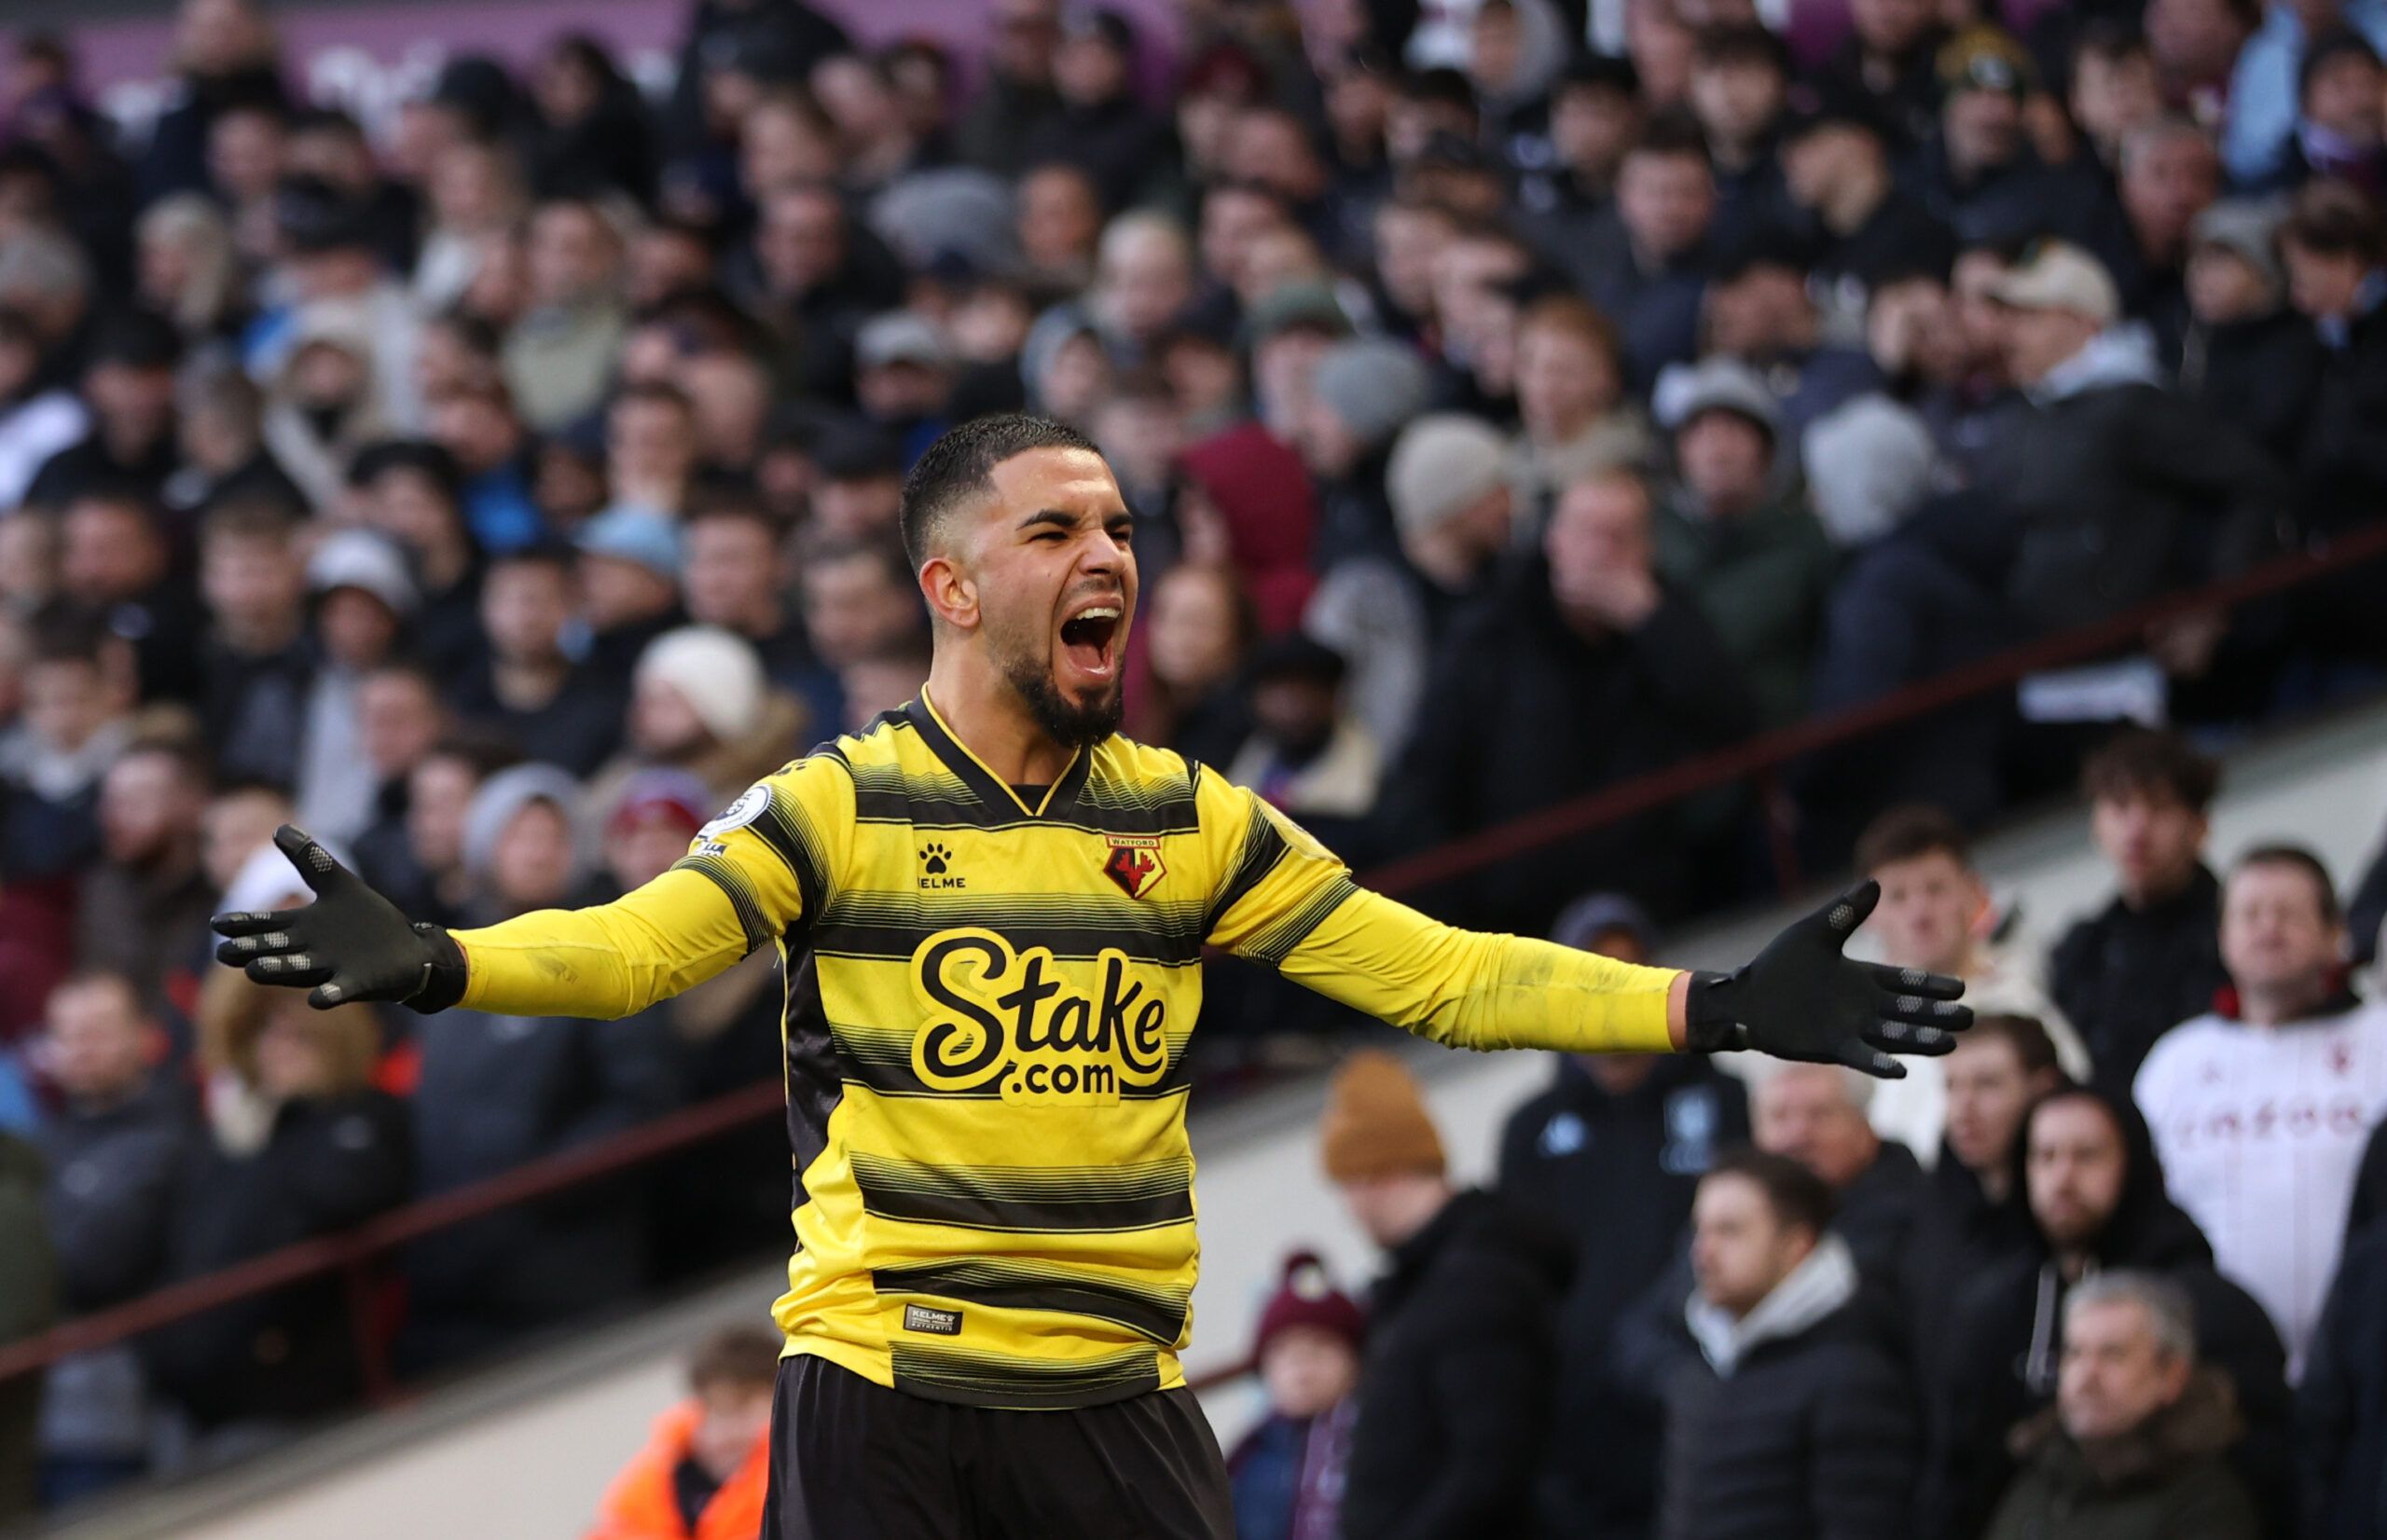 Soccer Football - Premier League - Aston Villa v Watford - Villa Park, Birmingham, Britain - February 19, 2022 Watford's Imran Louza celebrates after teammate Emmanuel Dennis scores their first goal Action Images via Reuters/Molly Darlington EDITORIAL USE ONLY. No use with unauthorized audio, video, data, fixture lists, club/league logos or 'live' services. Online in-match use limited to 75 images, no video emulation. No use in betting, games or single club /league/player publications.  Please c